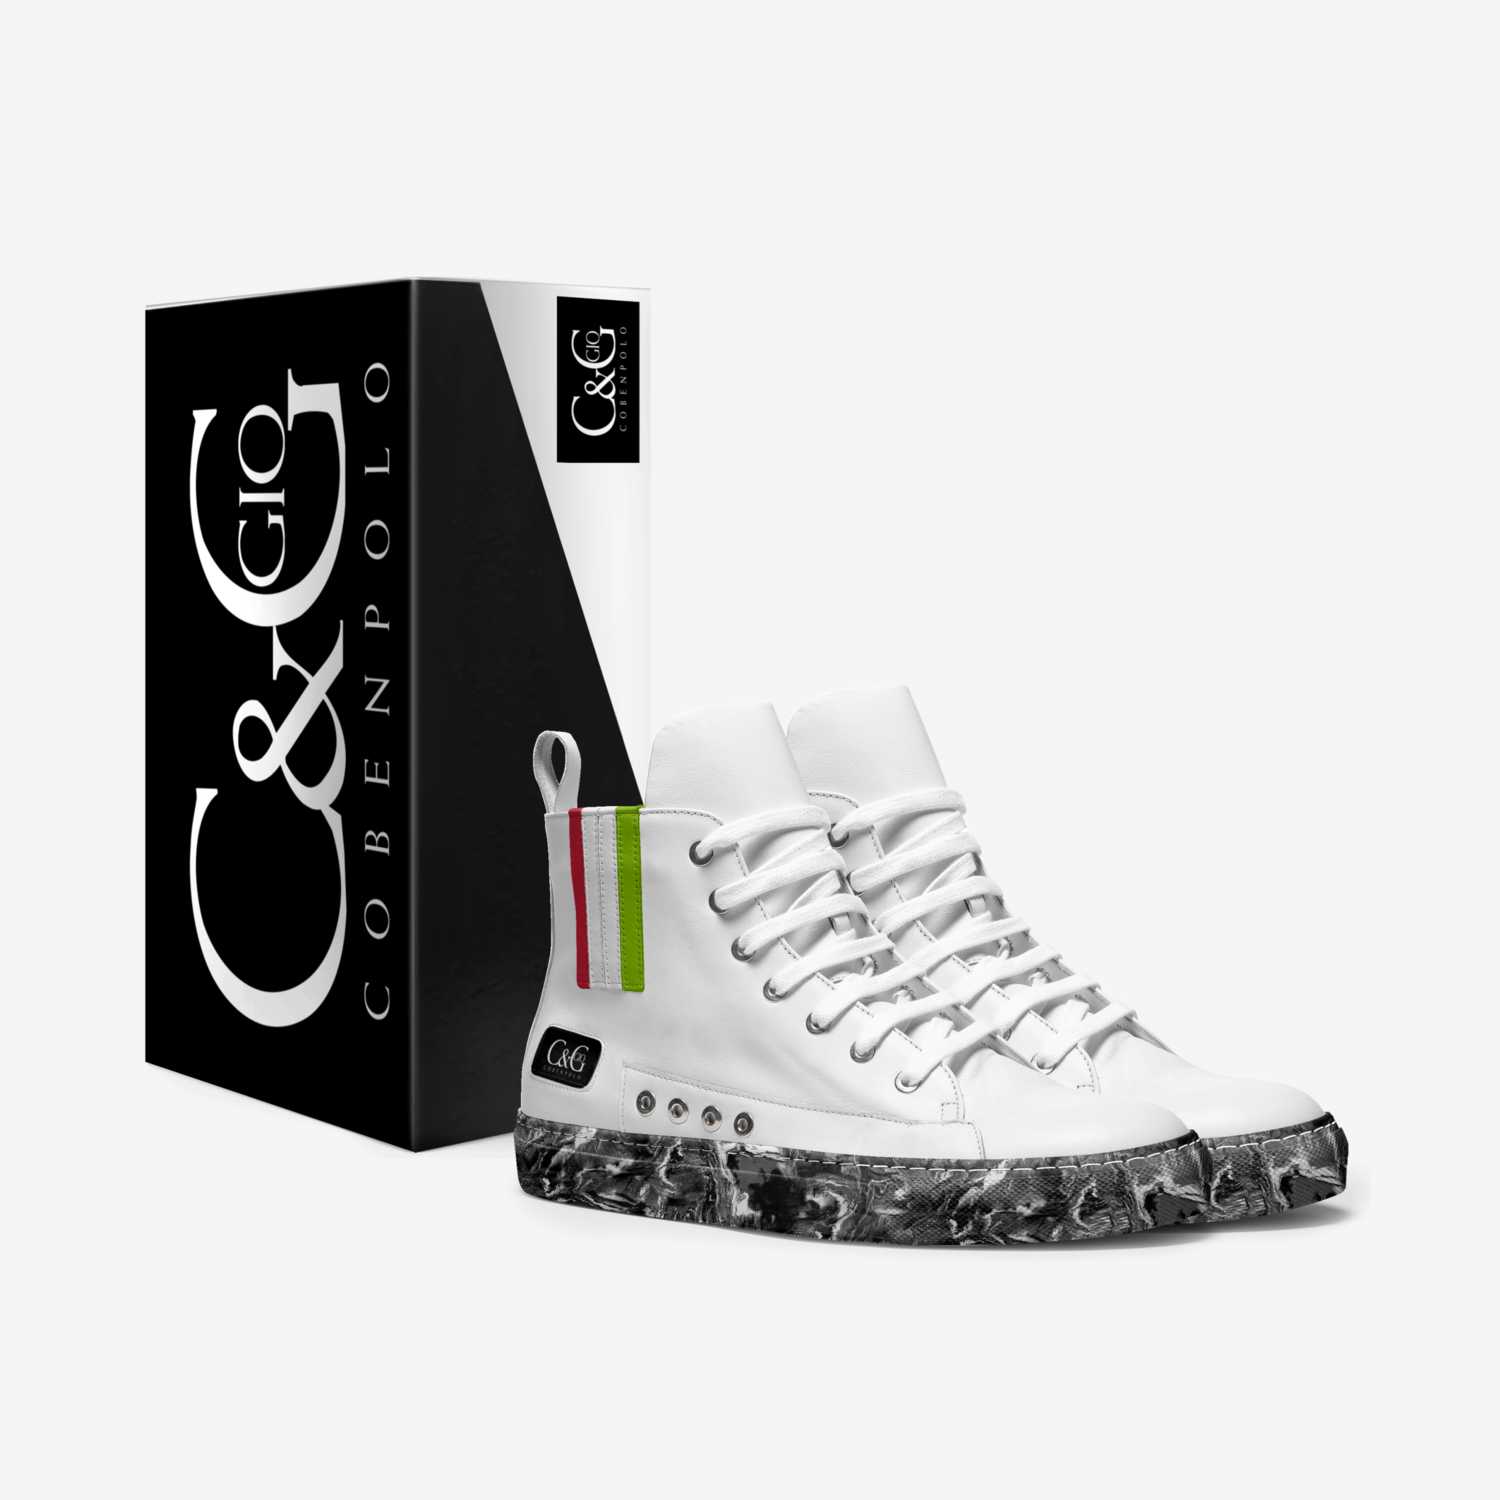 C&G custom made in Italy shoes by Costa Cobenpolo | Box view